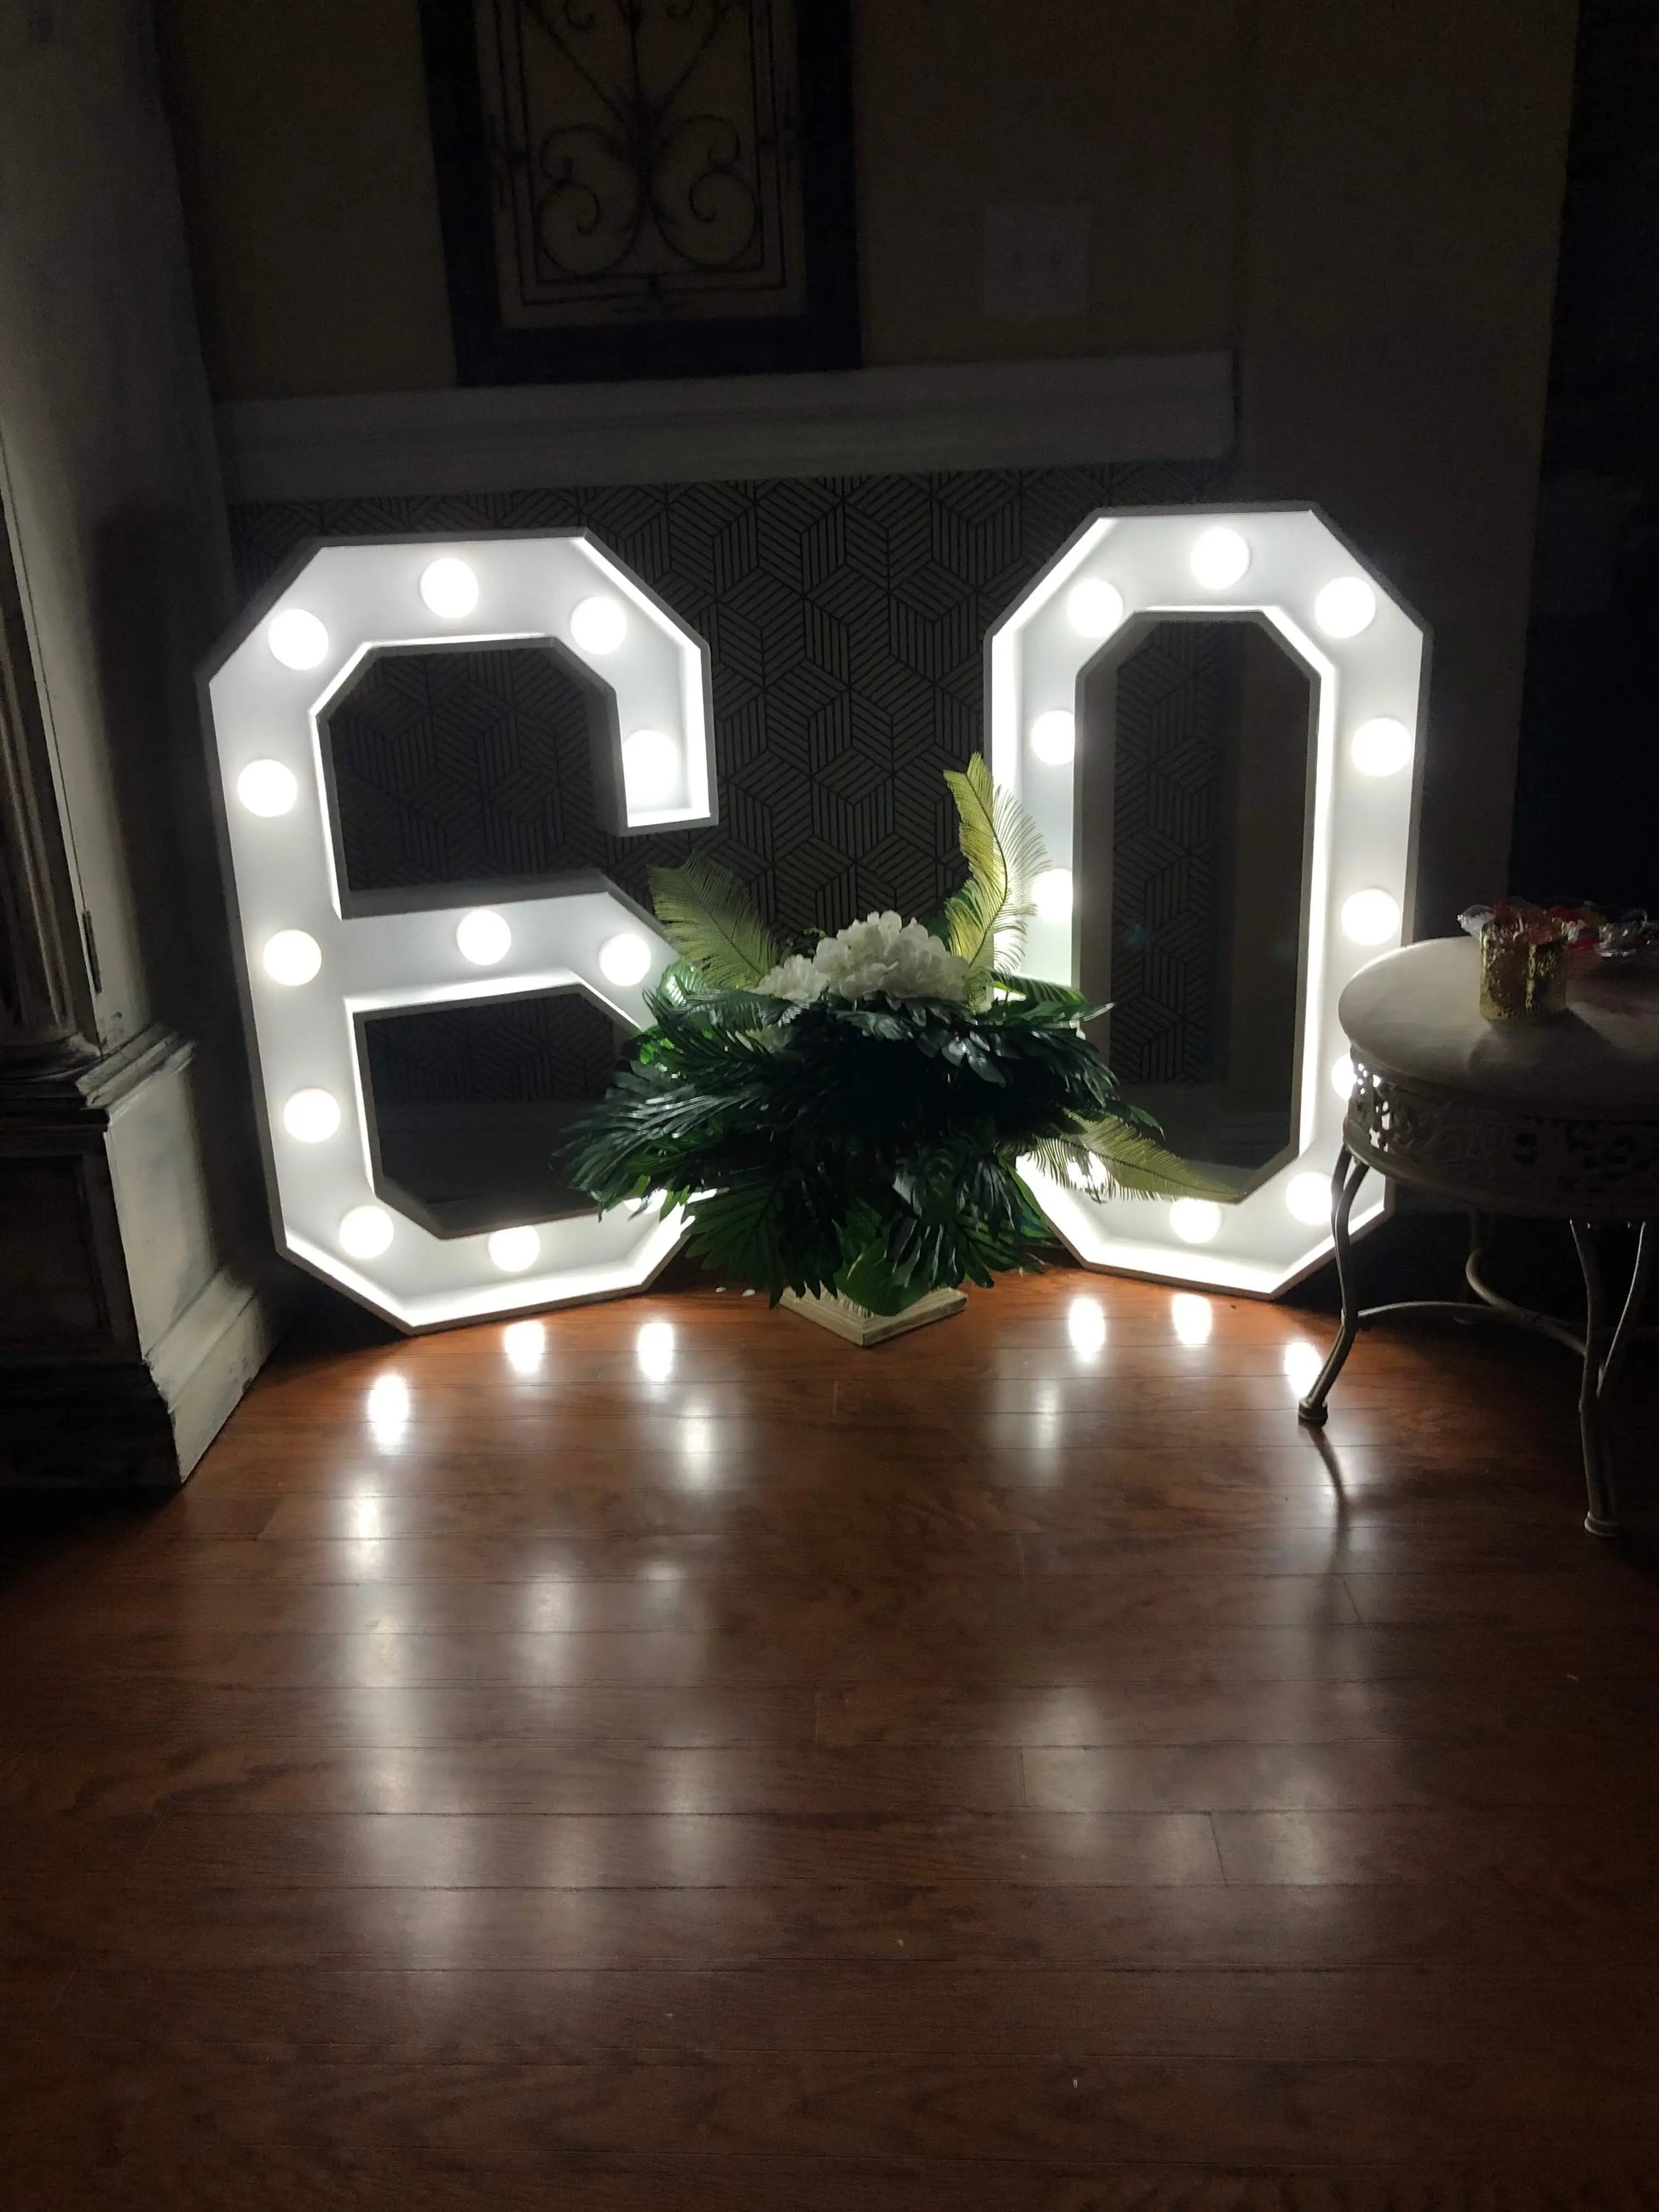 Marquee Light Up Letters | Marquee Numbers With Lights | NC collageandwood